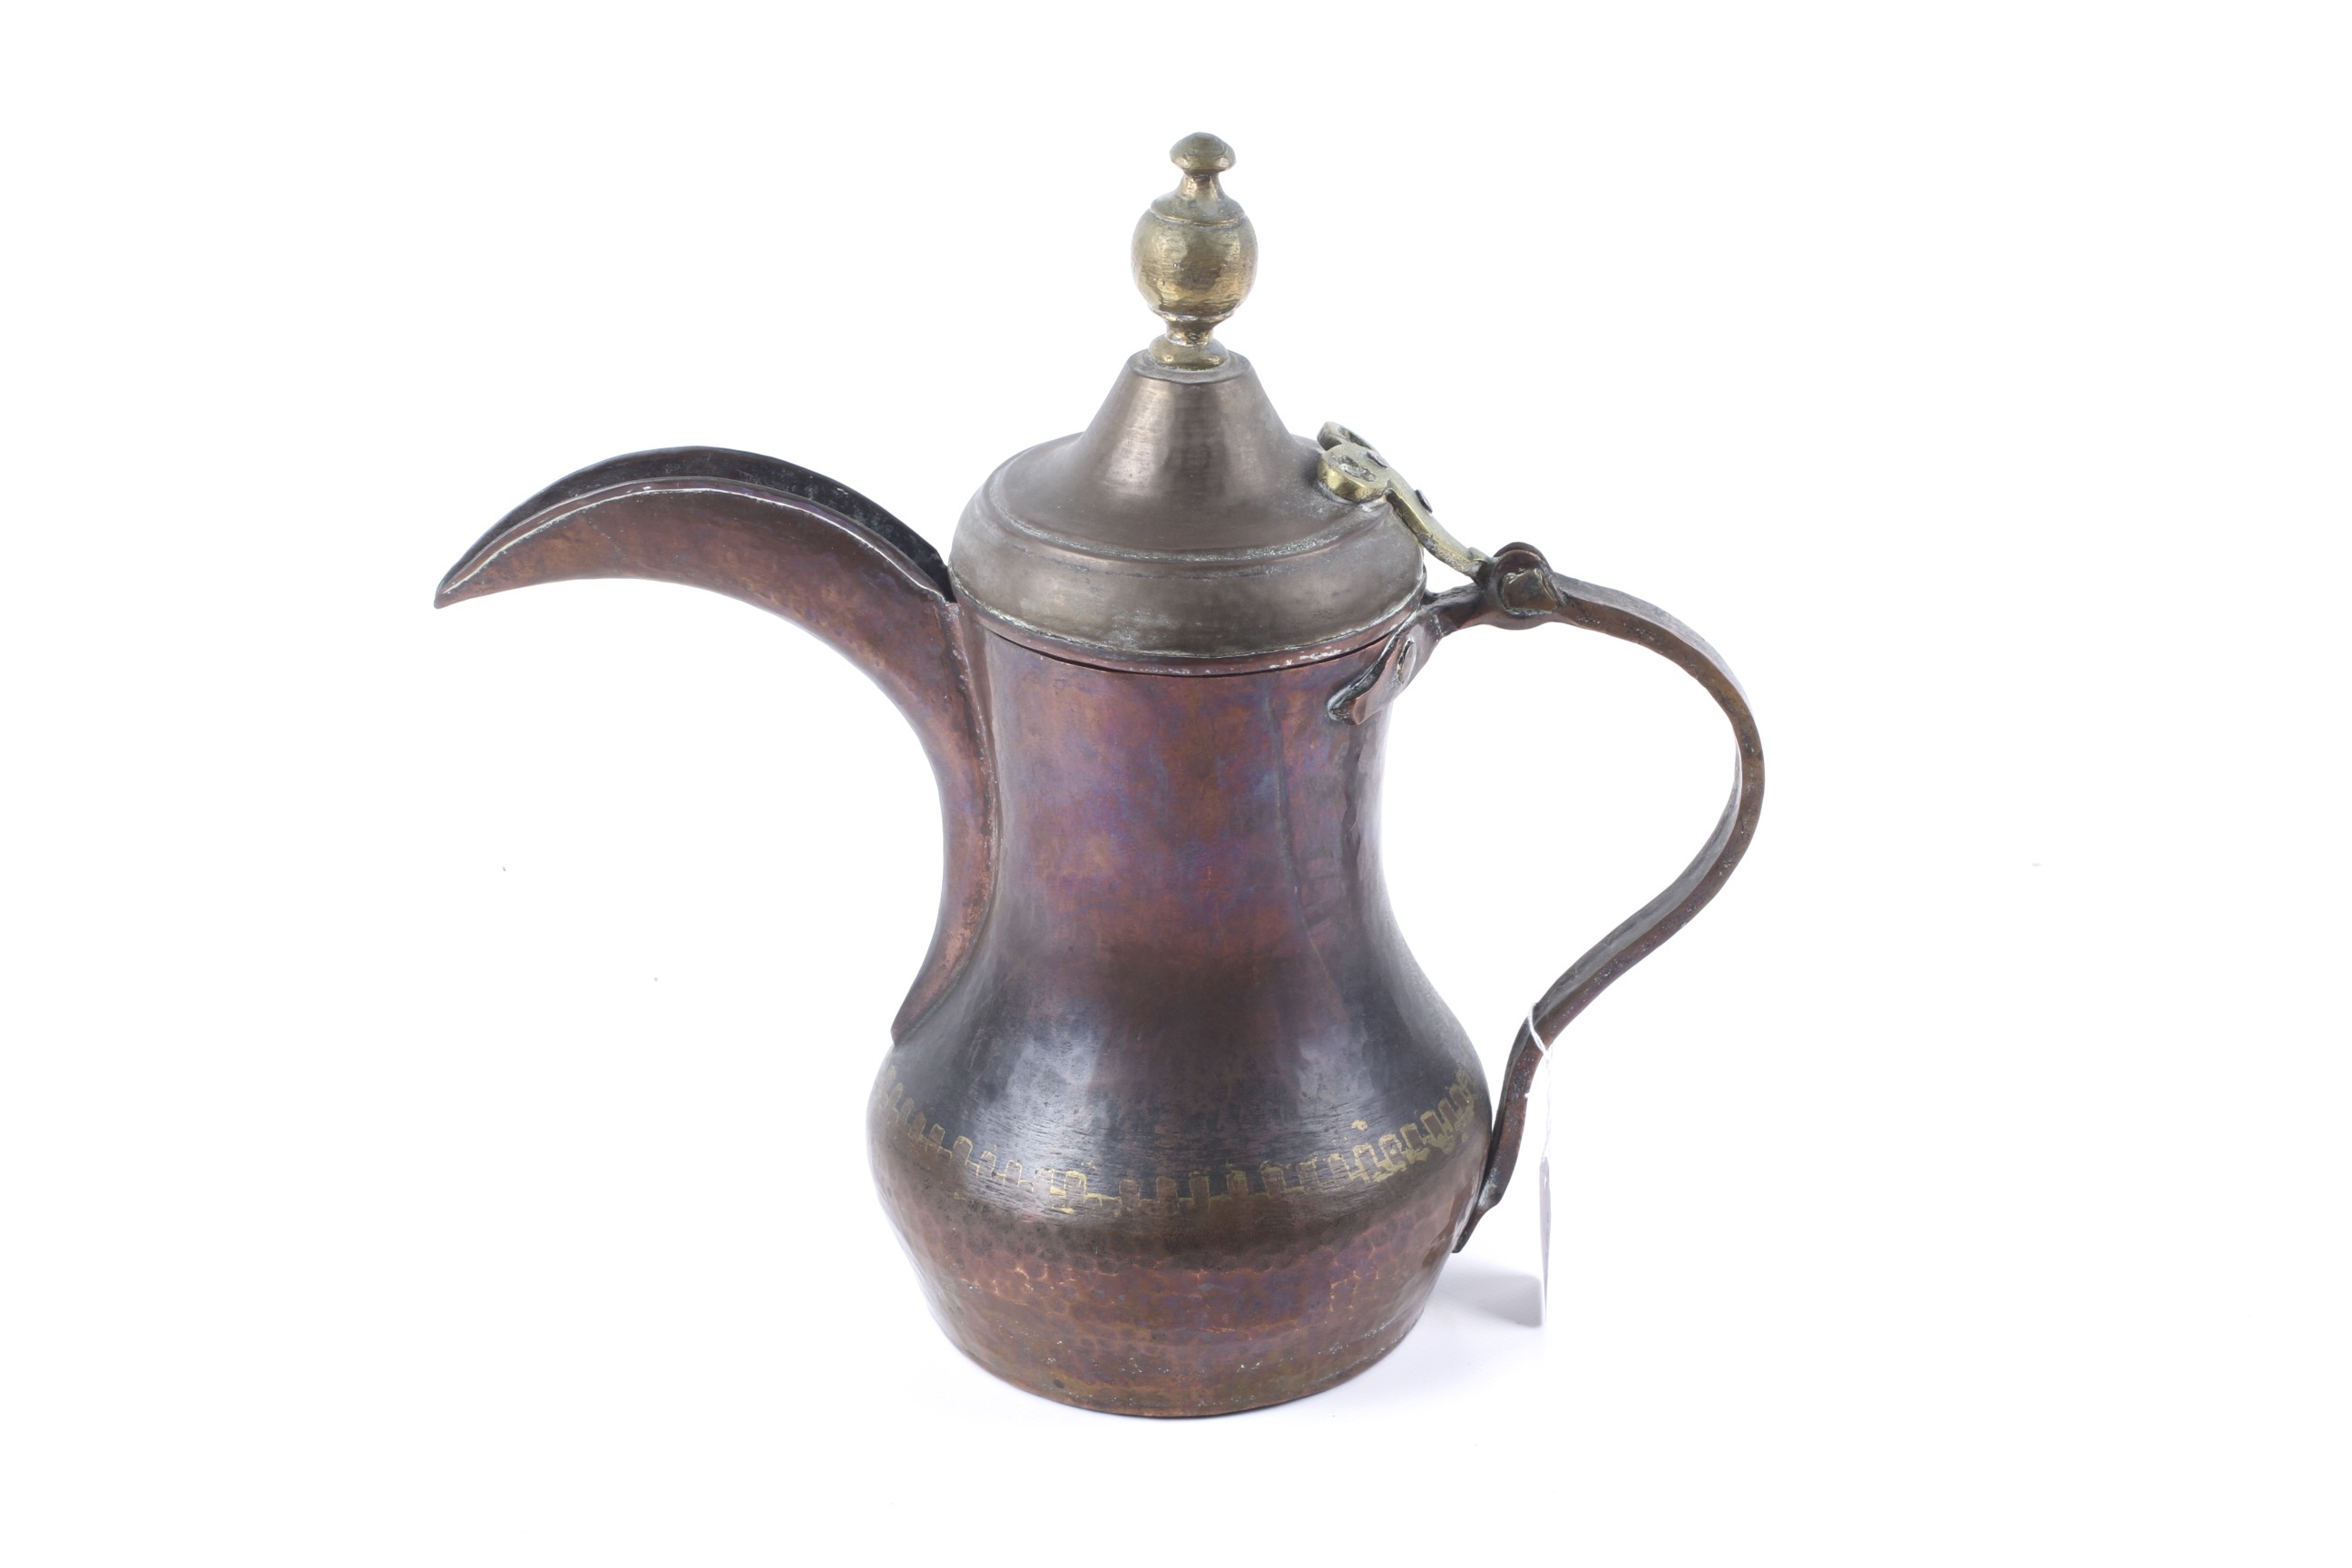 A Middle Eastern jug.